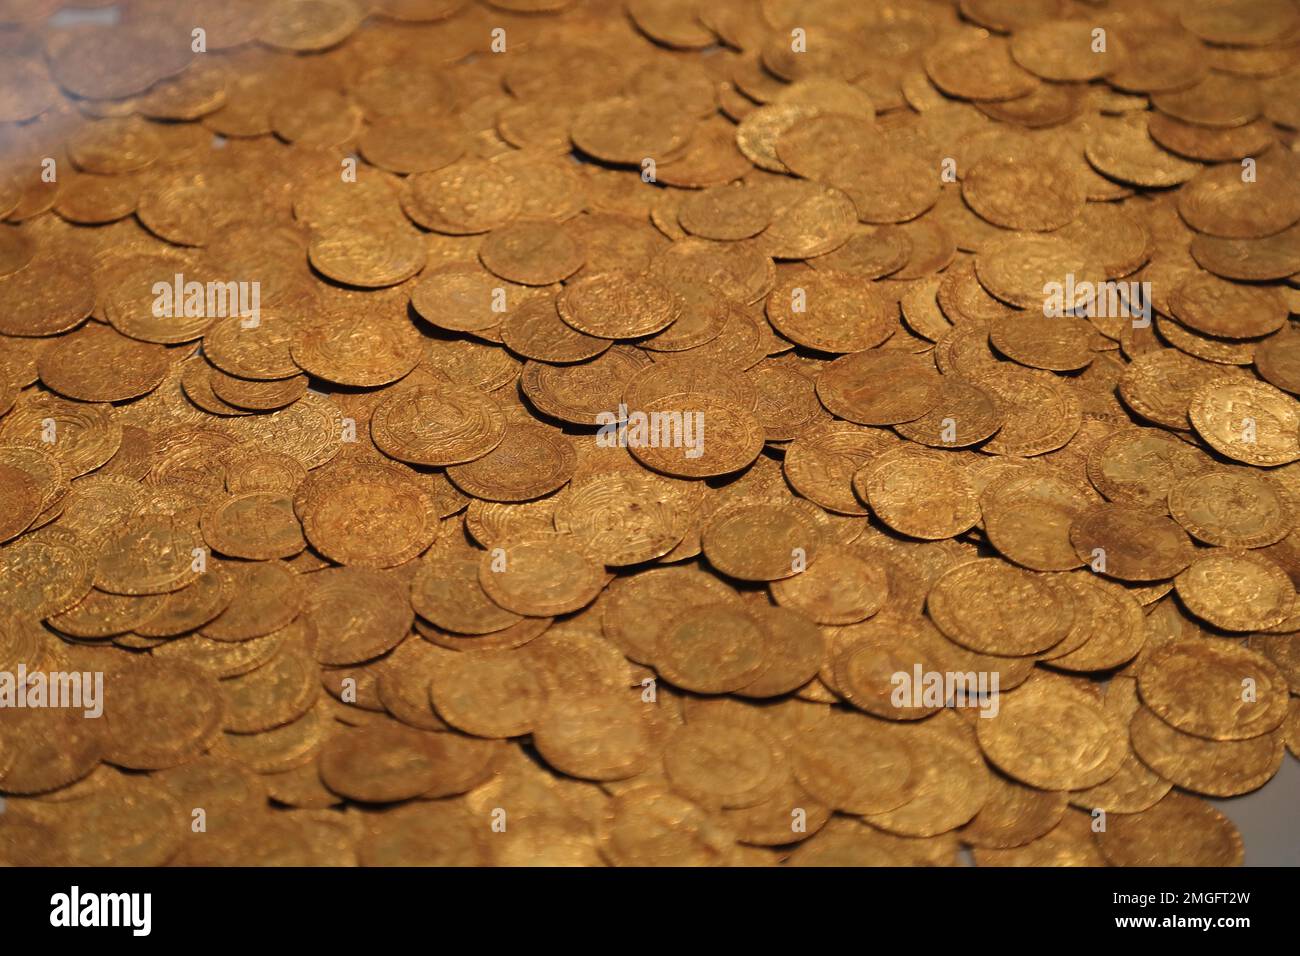 Medieval gold coins from the Fishpool hoard at the British museum ...